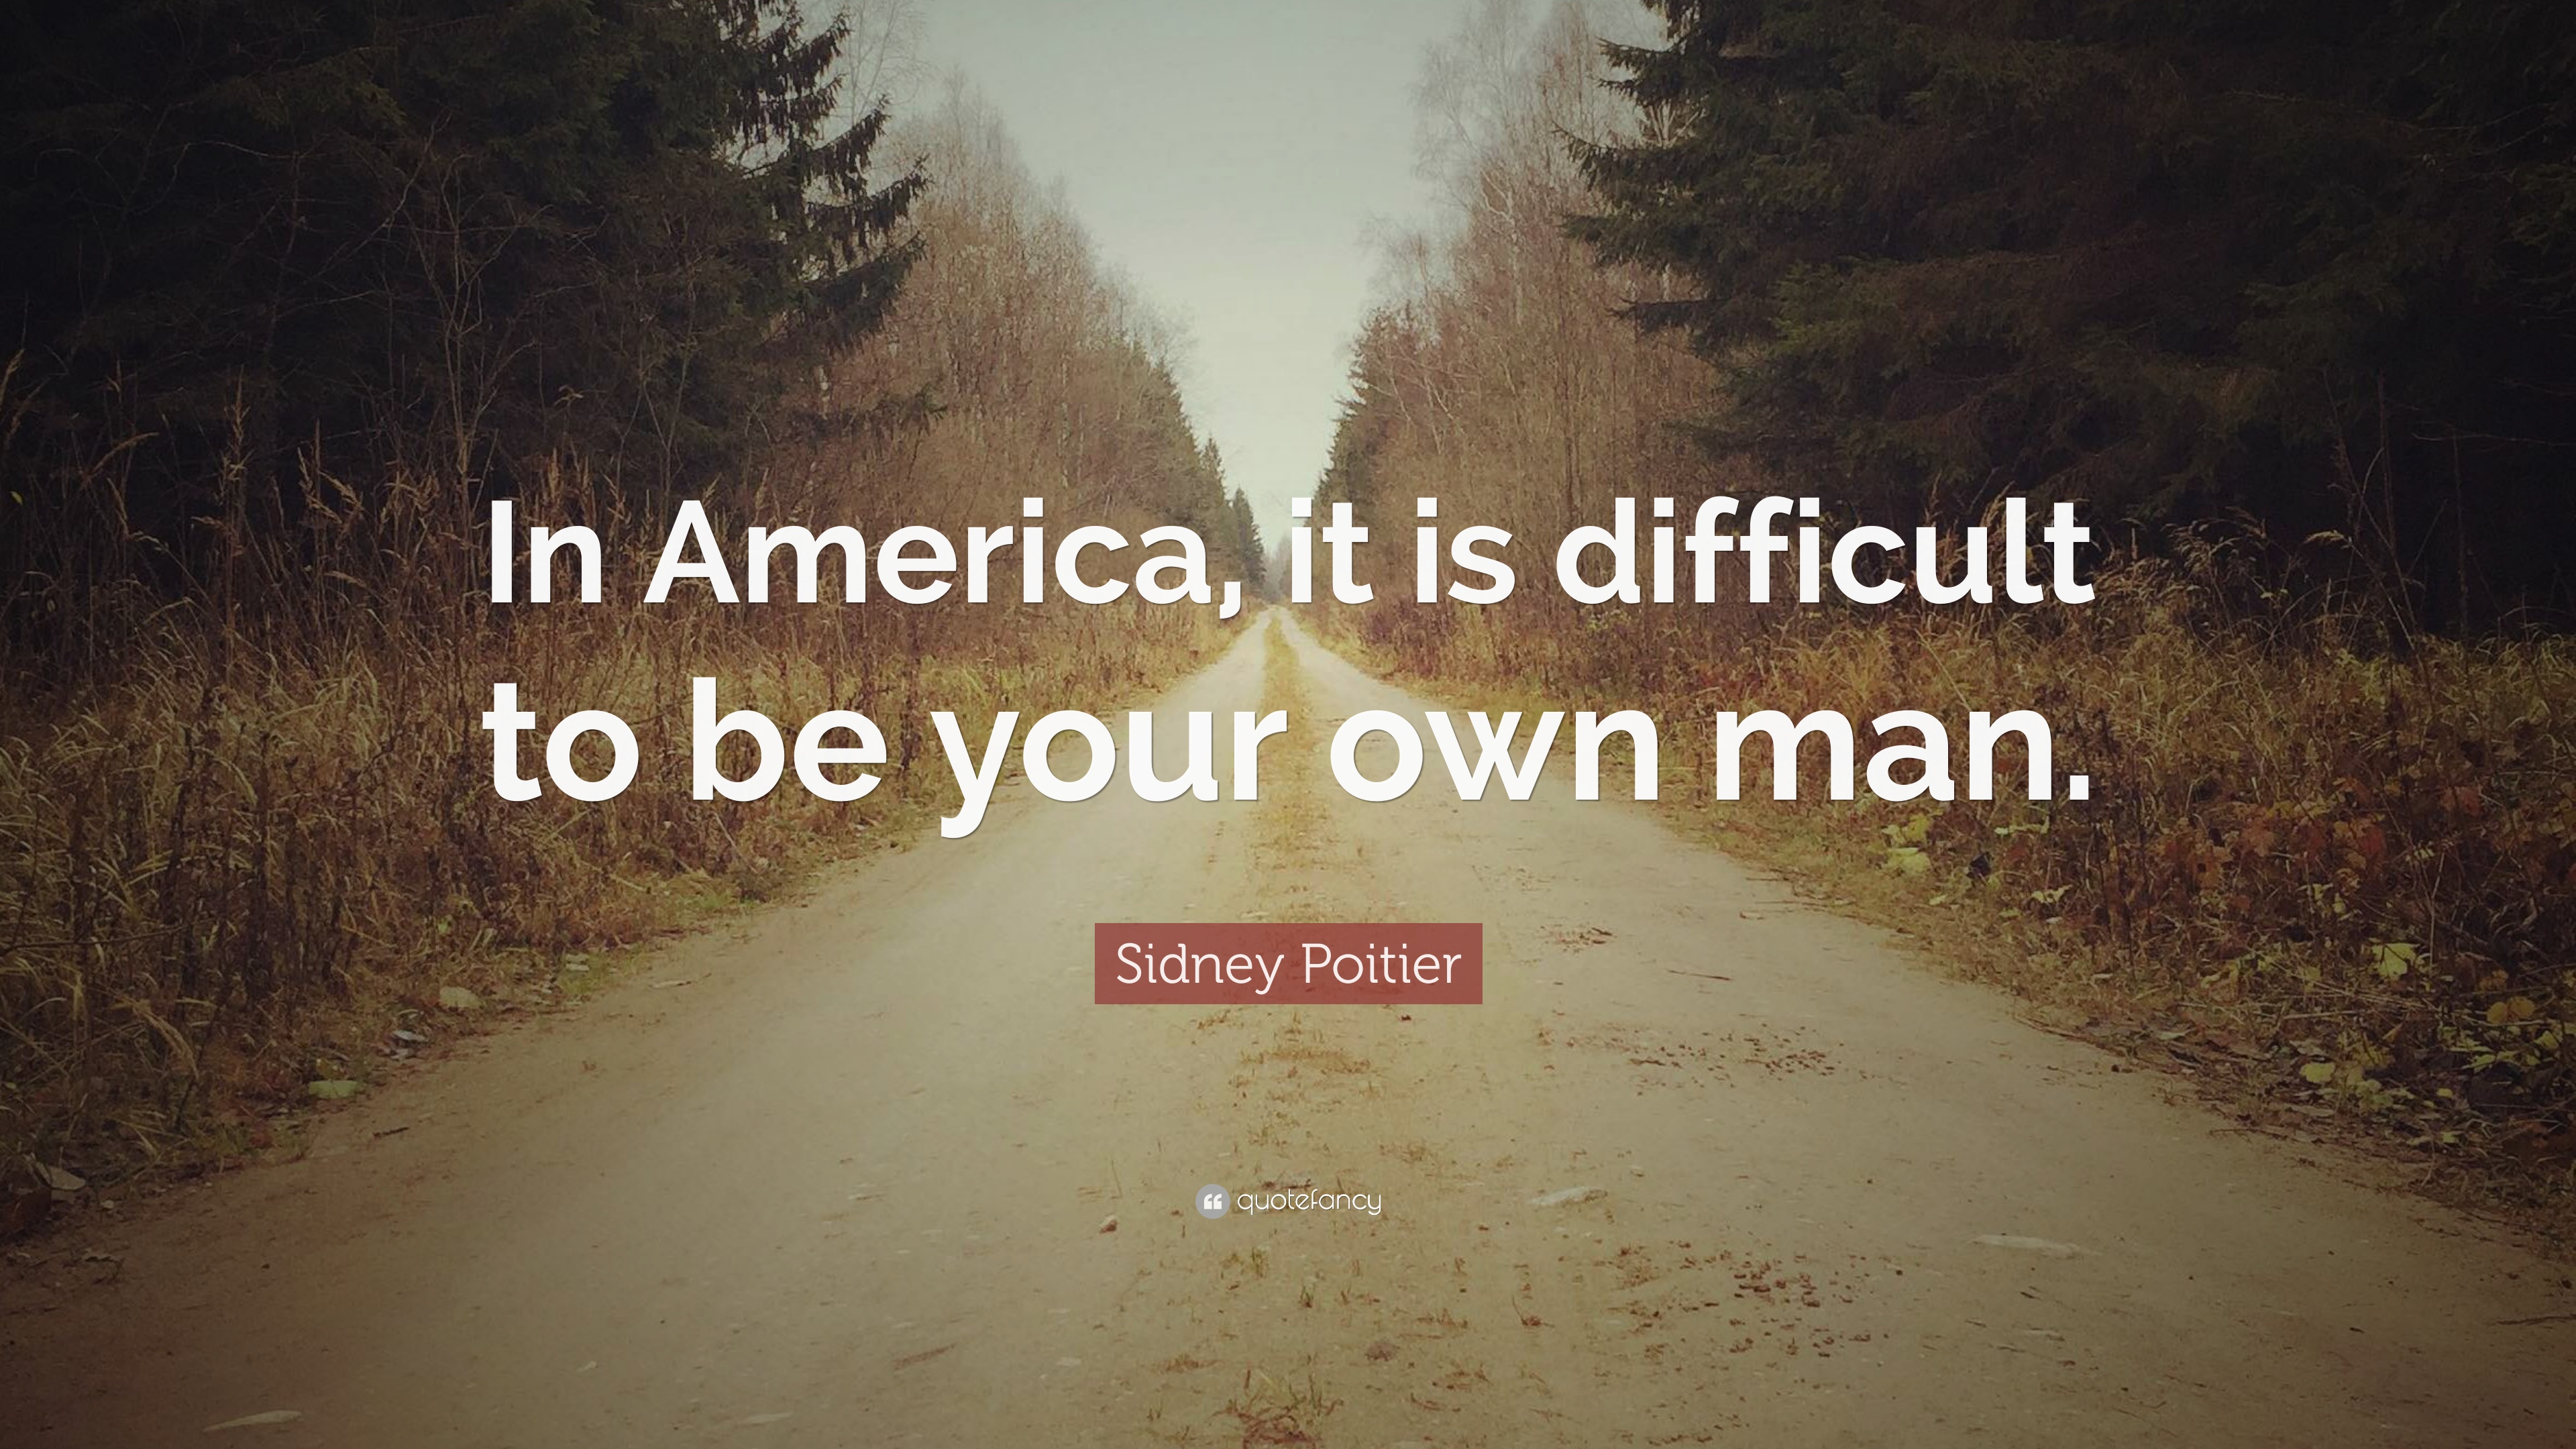 Sidney Poitier Quote: “In America, it is difficult to be your own